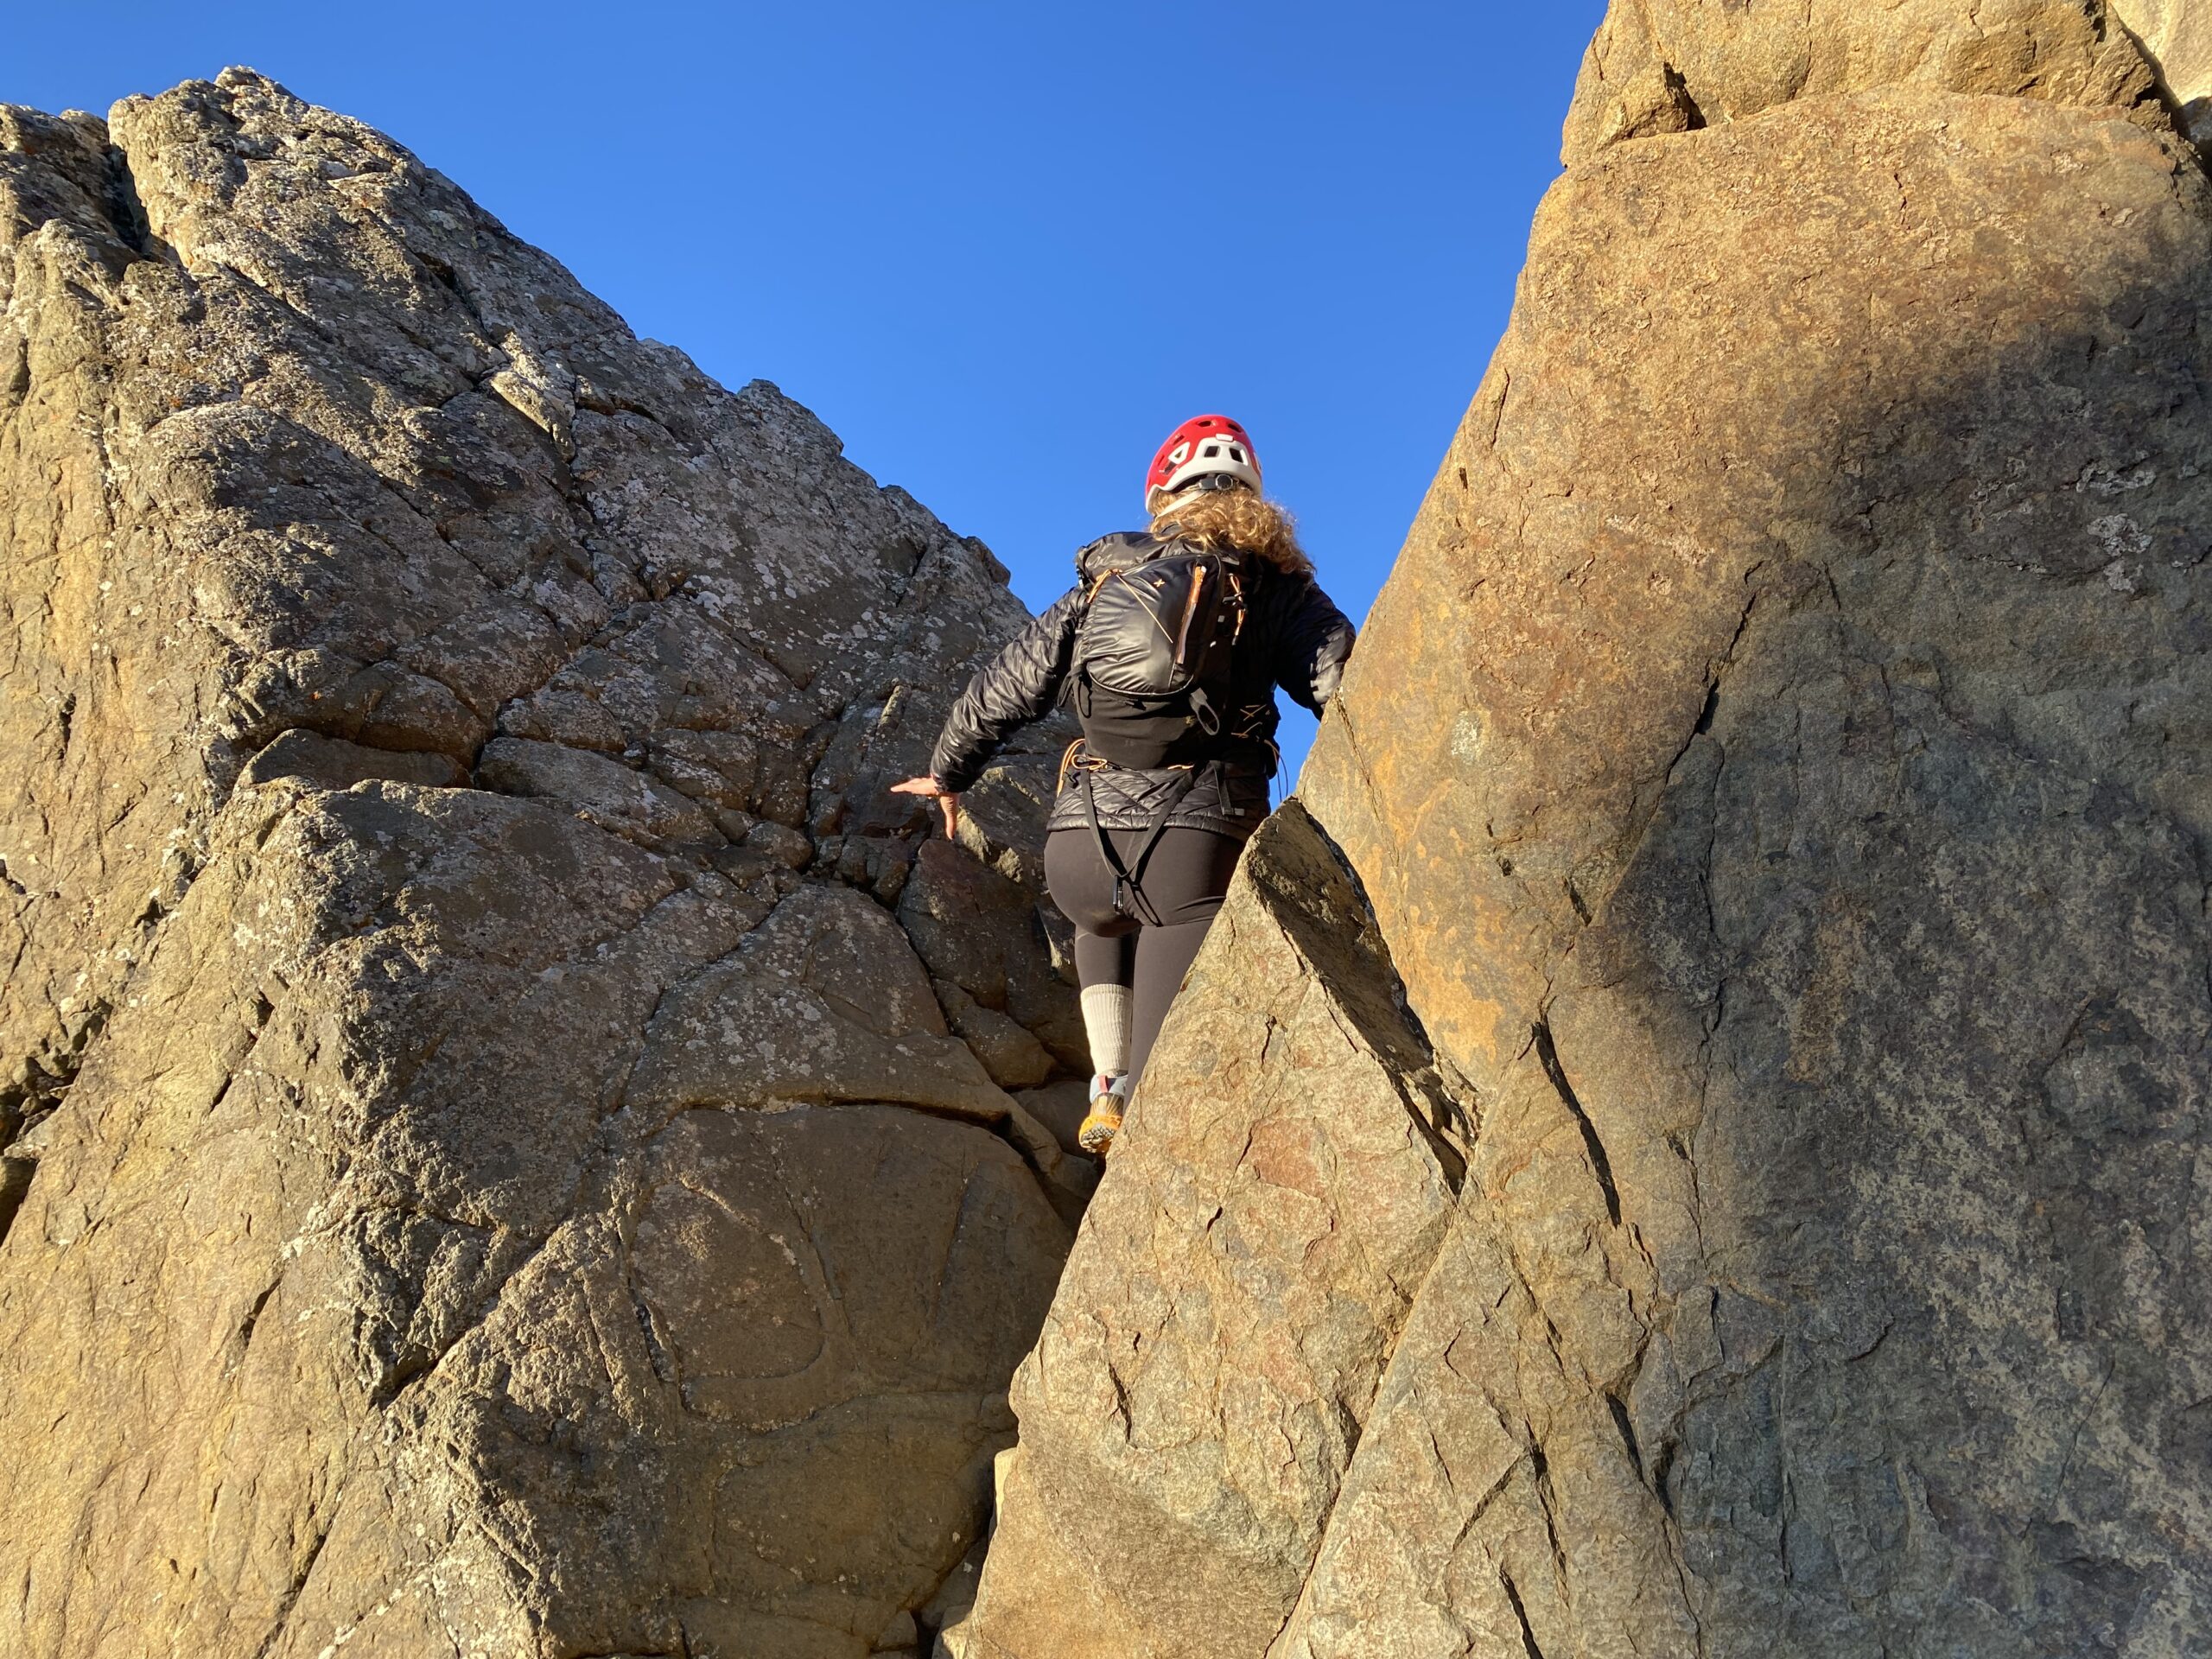 A woman with a red climbing helmet and black backpack climbing through two large rocks.